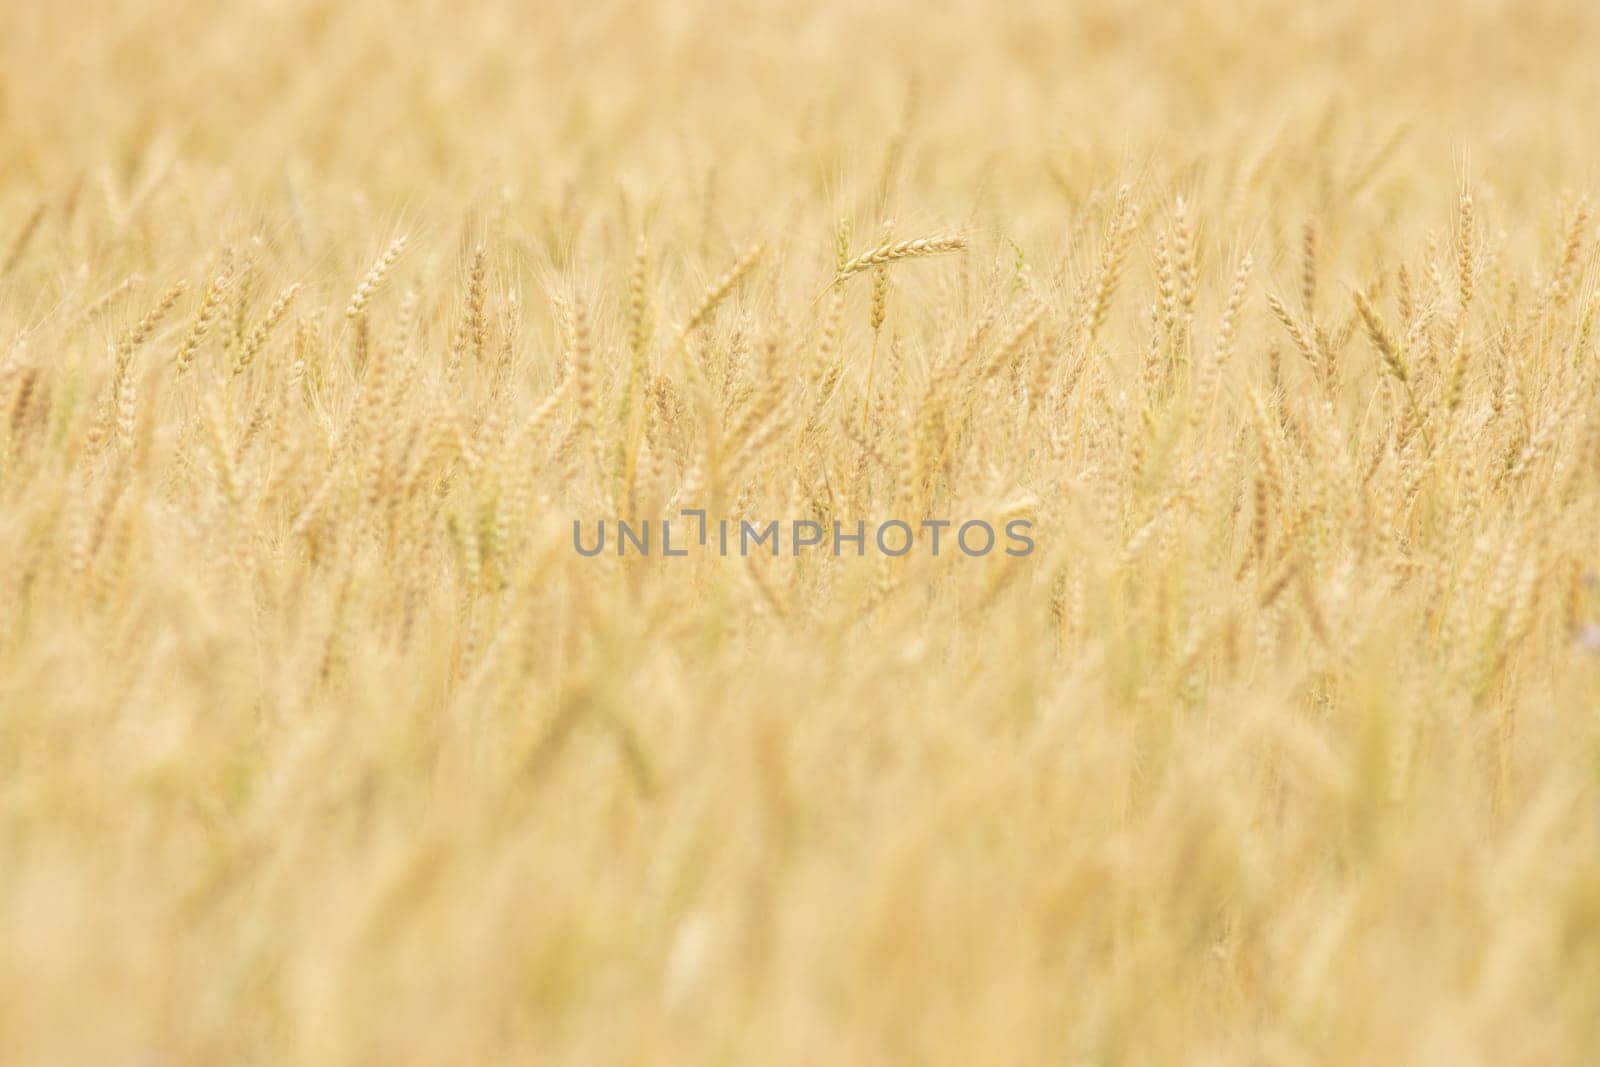 A field of tall grass with a blurry background